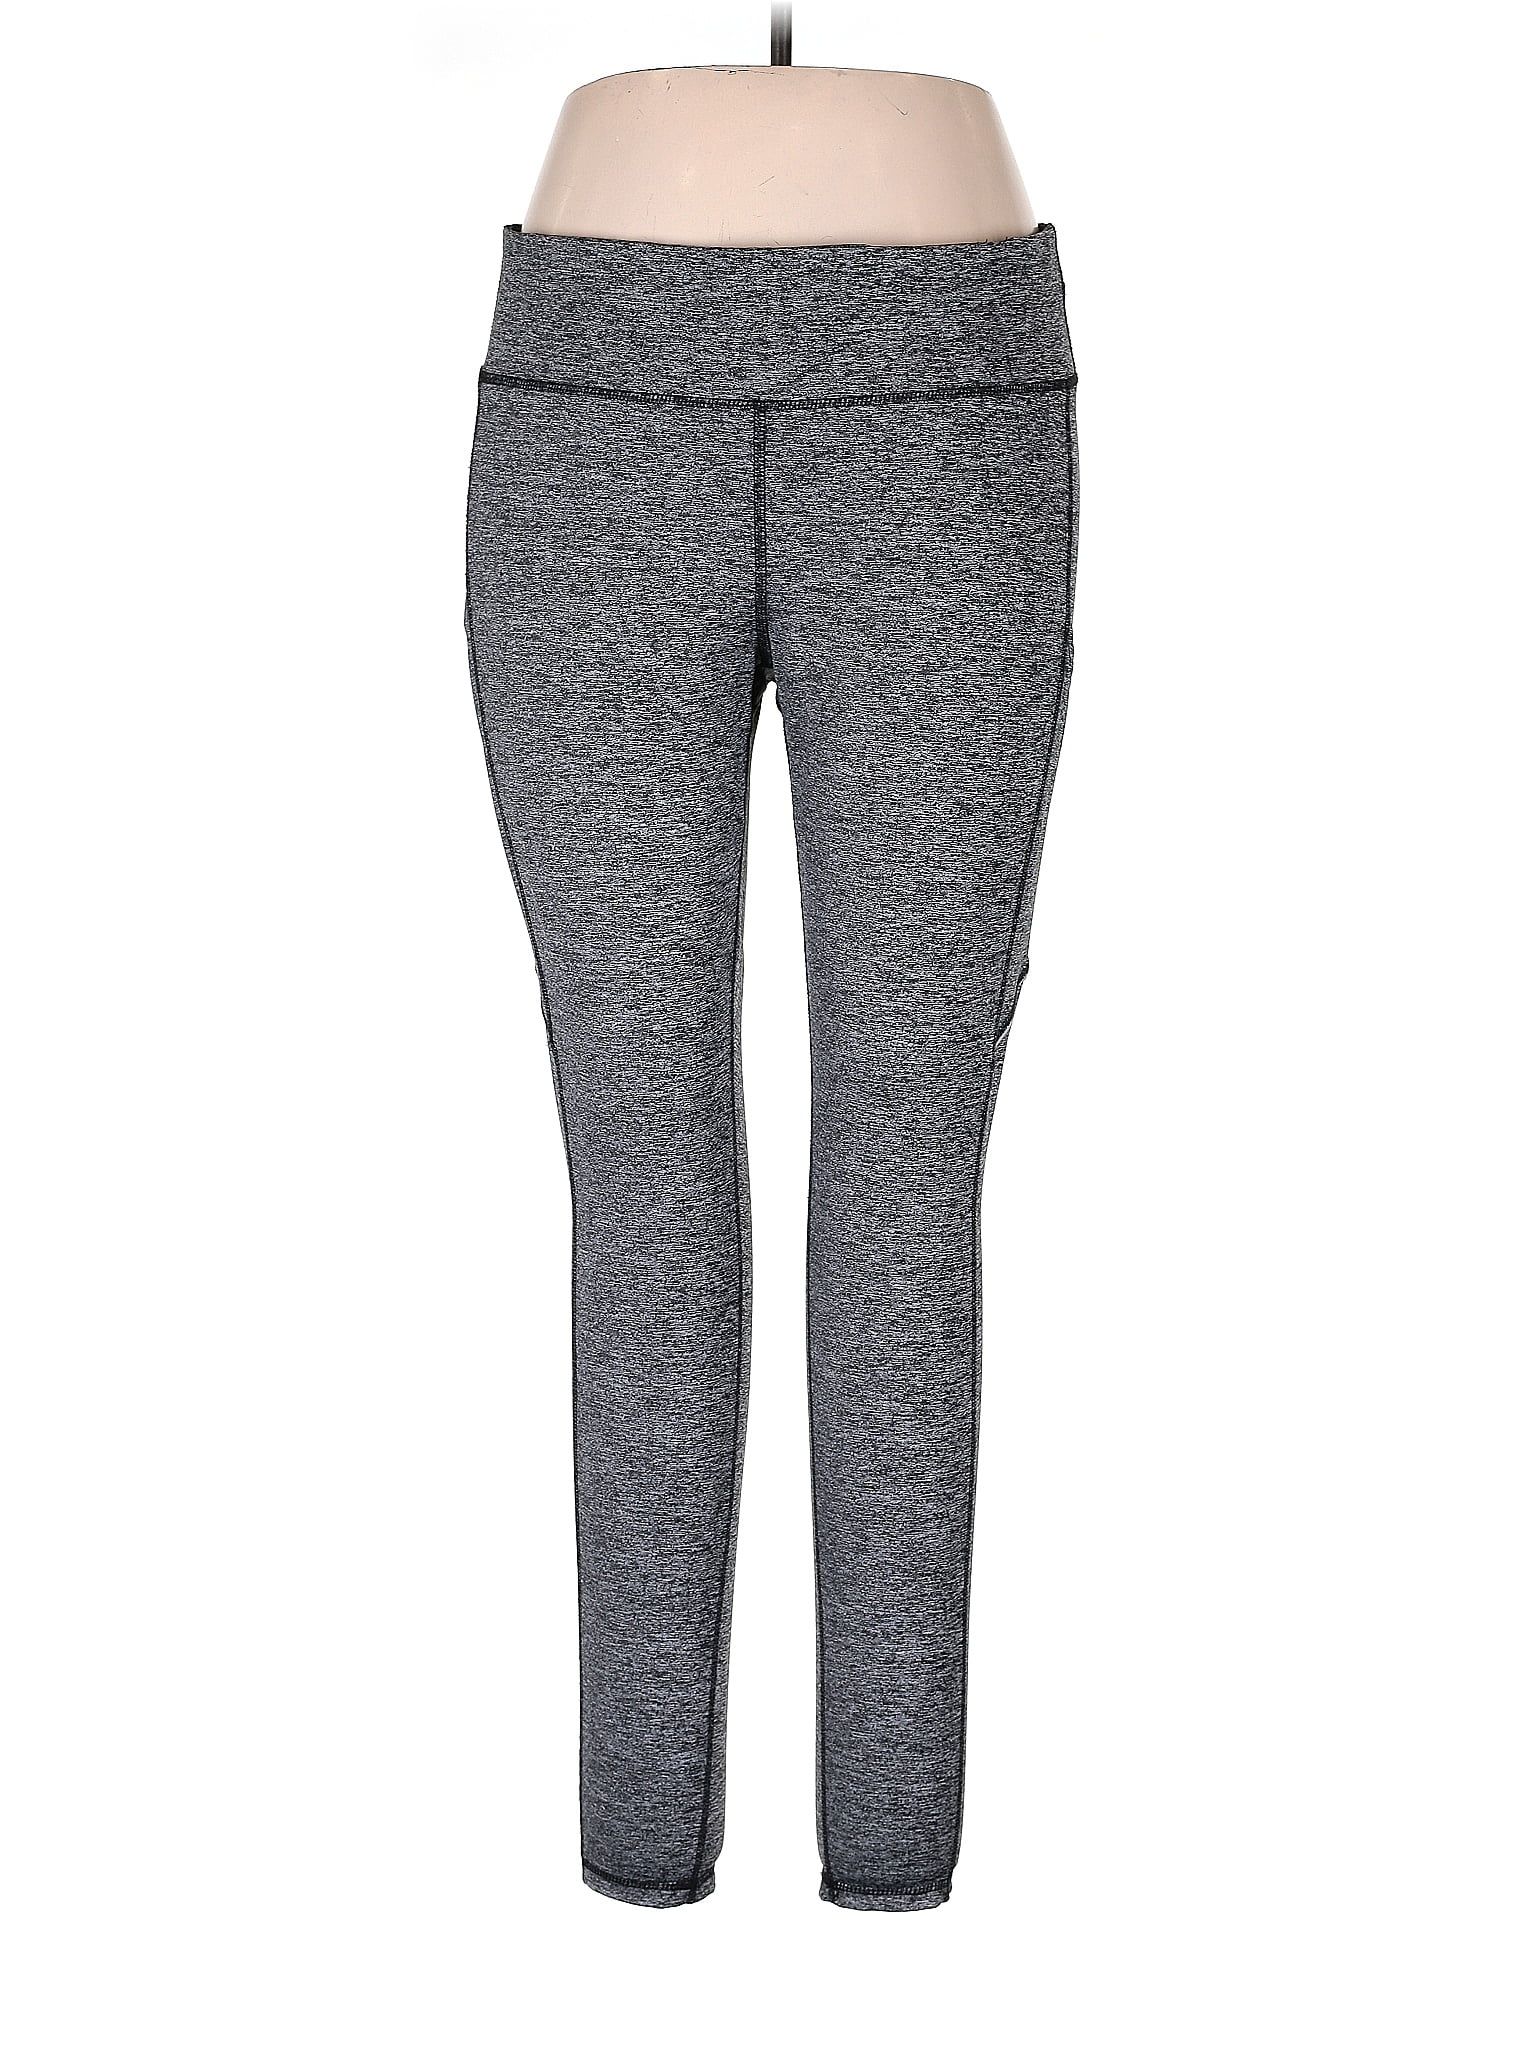 Xersion Gray Active Pants Size XL - 37% off